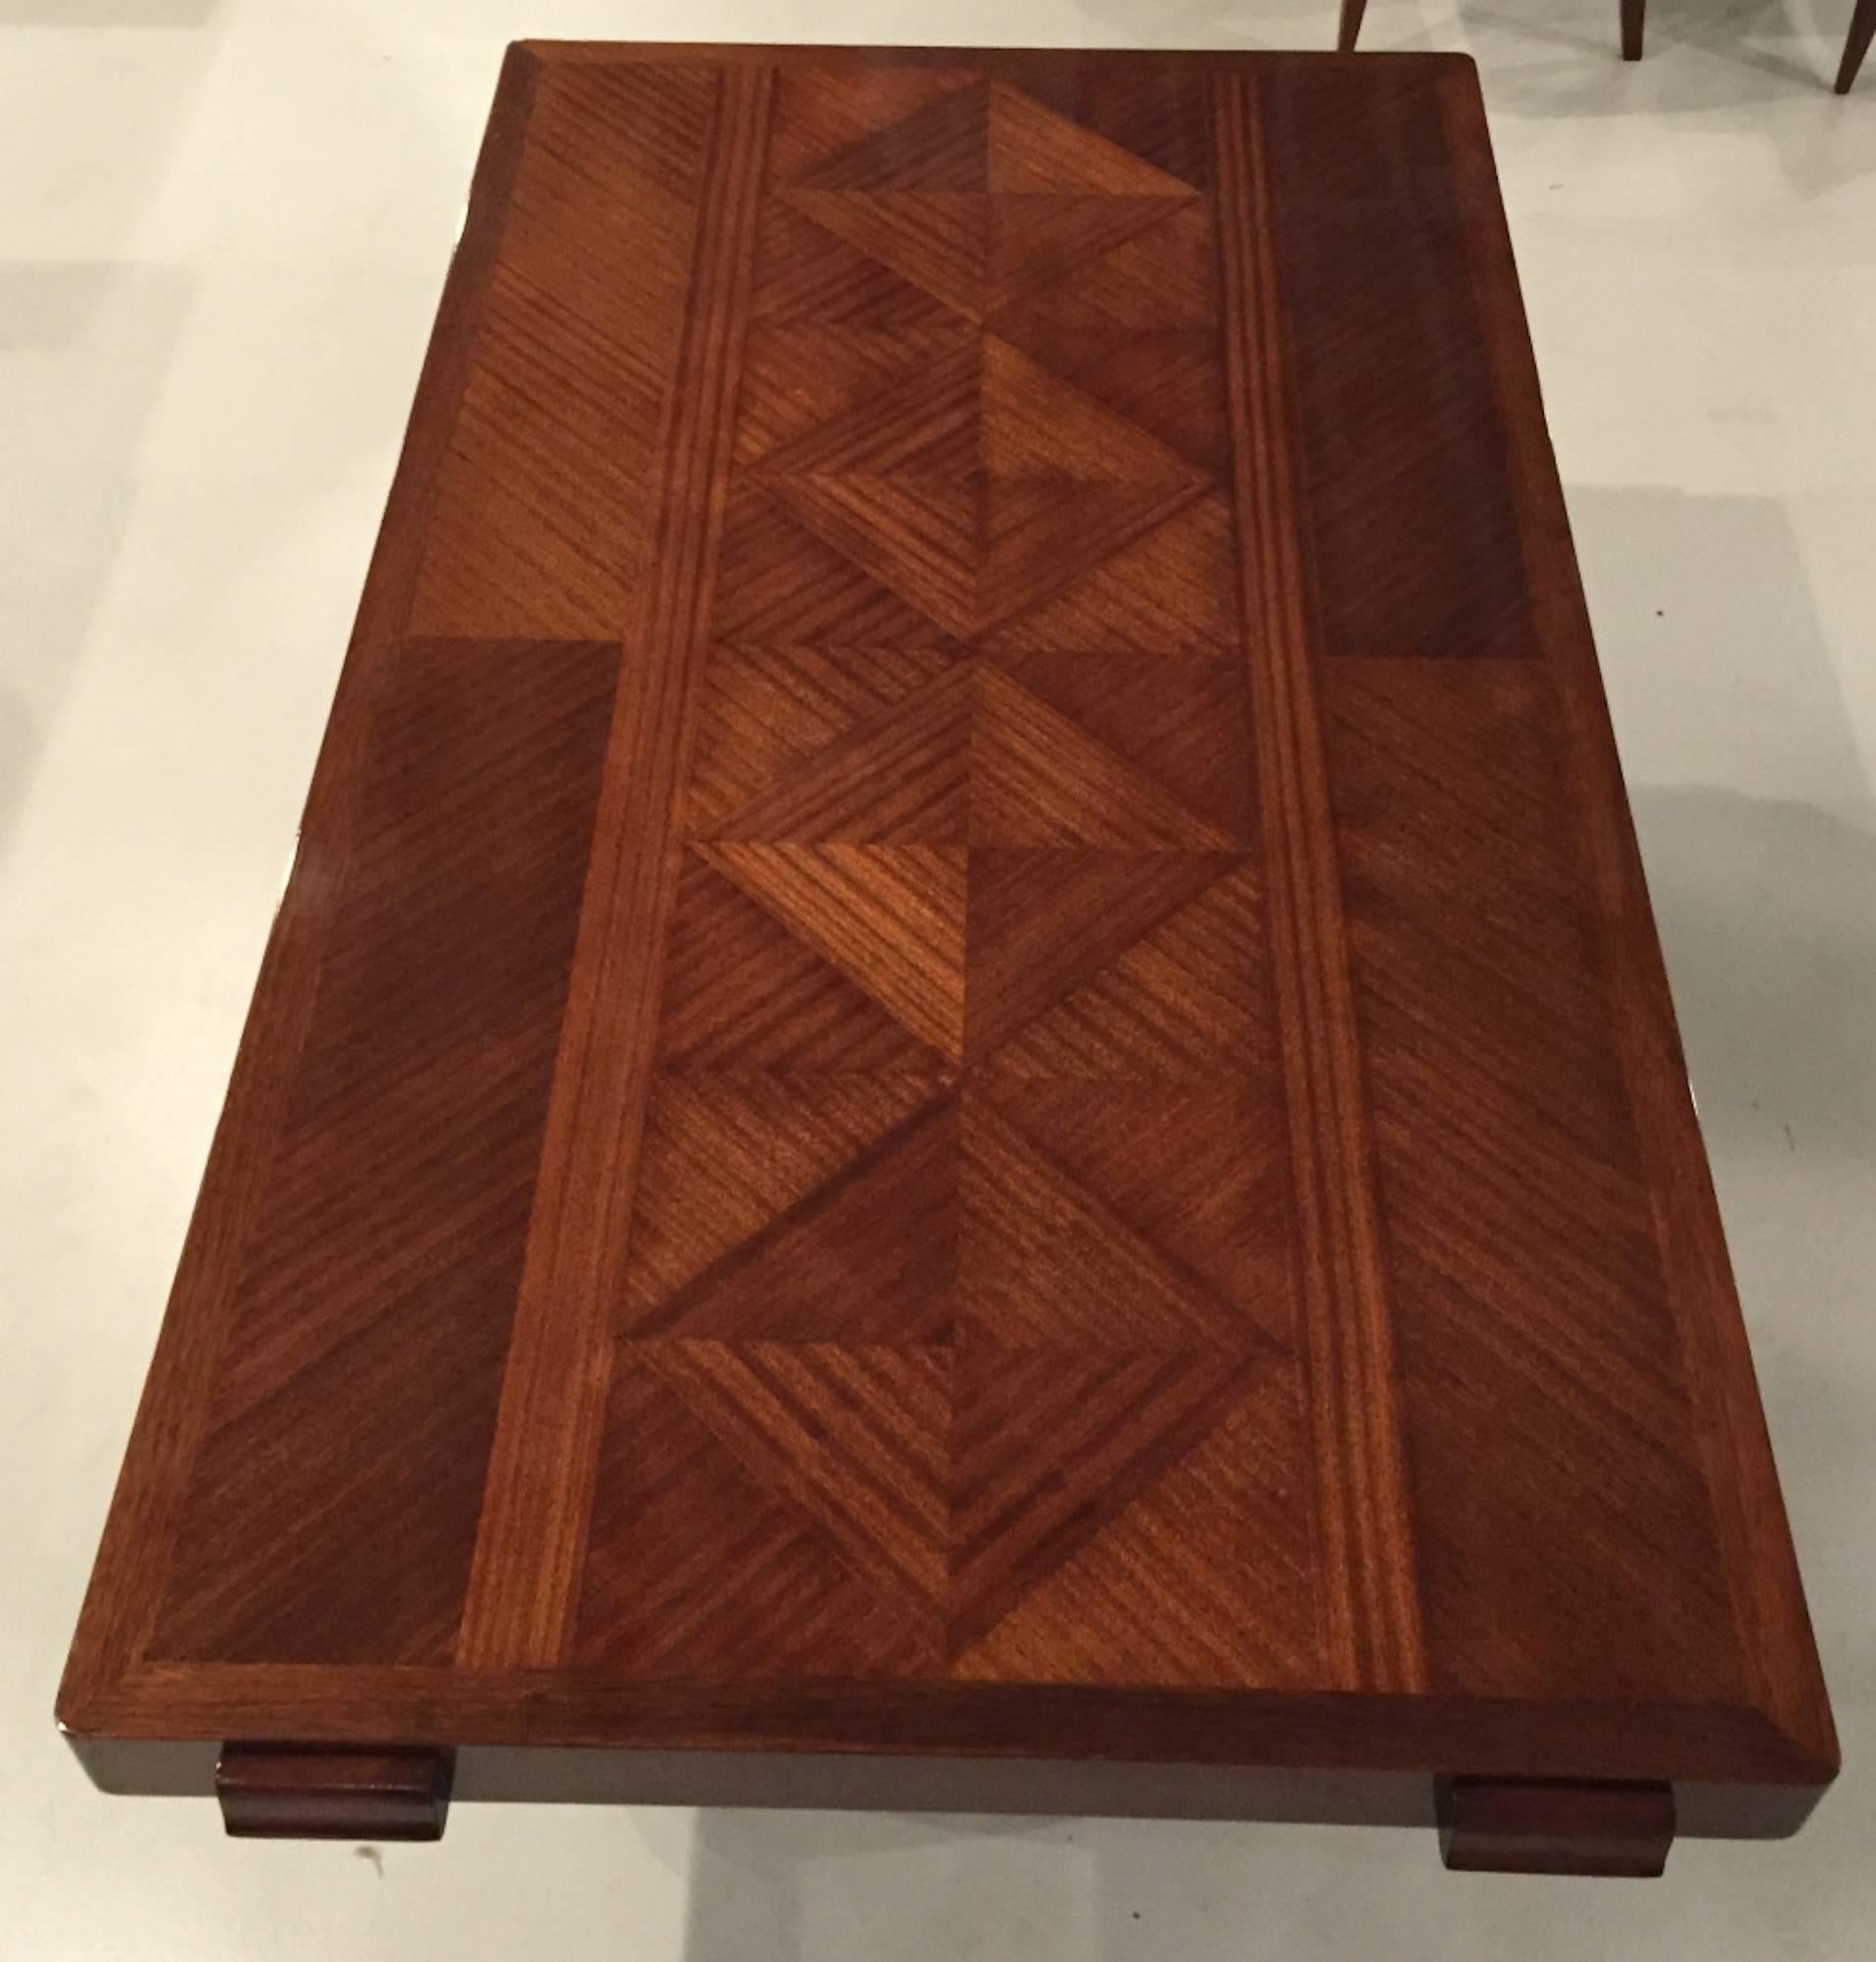 Stunning French Art Deco masterpiece dining table is by designer Gaston Poisson.  The solid mahogany wood is breathtaking with legs that coordinate  with a matching buffet. Incredible inlay top. Beautiful French finish. 